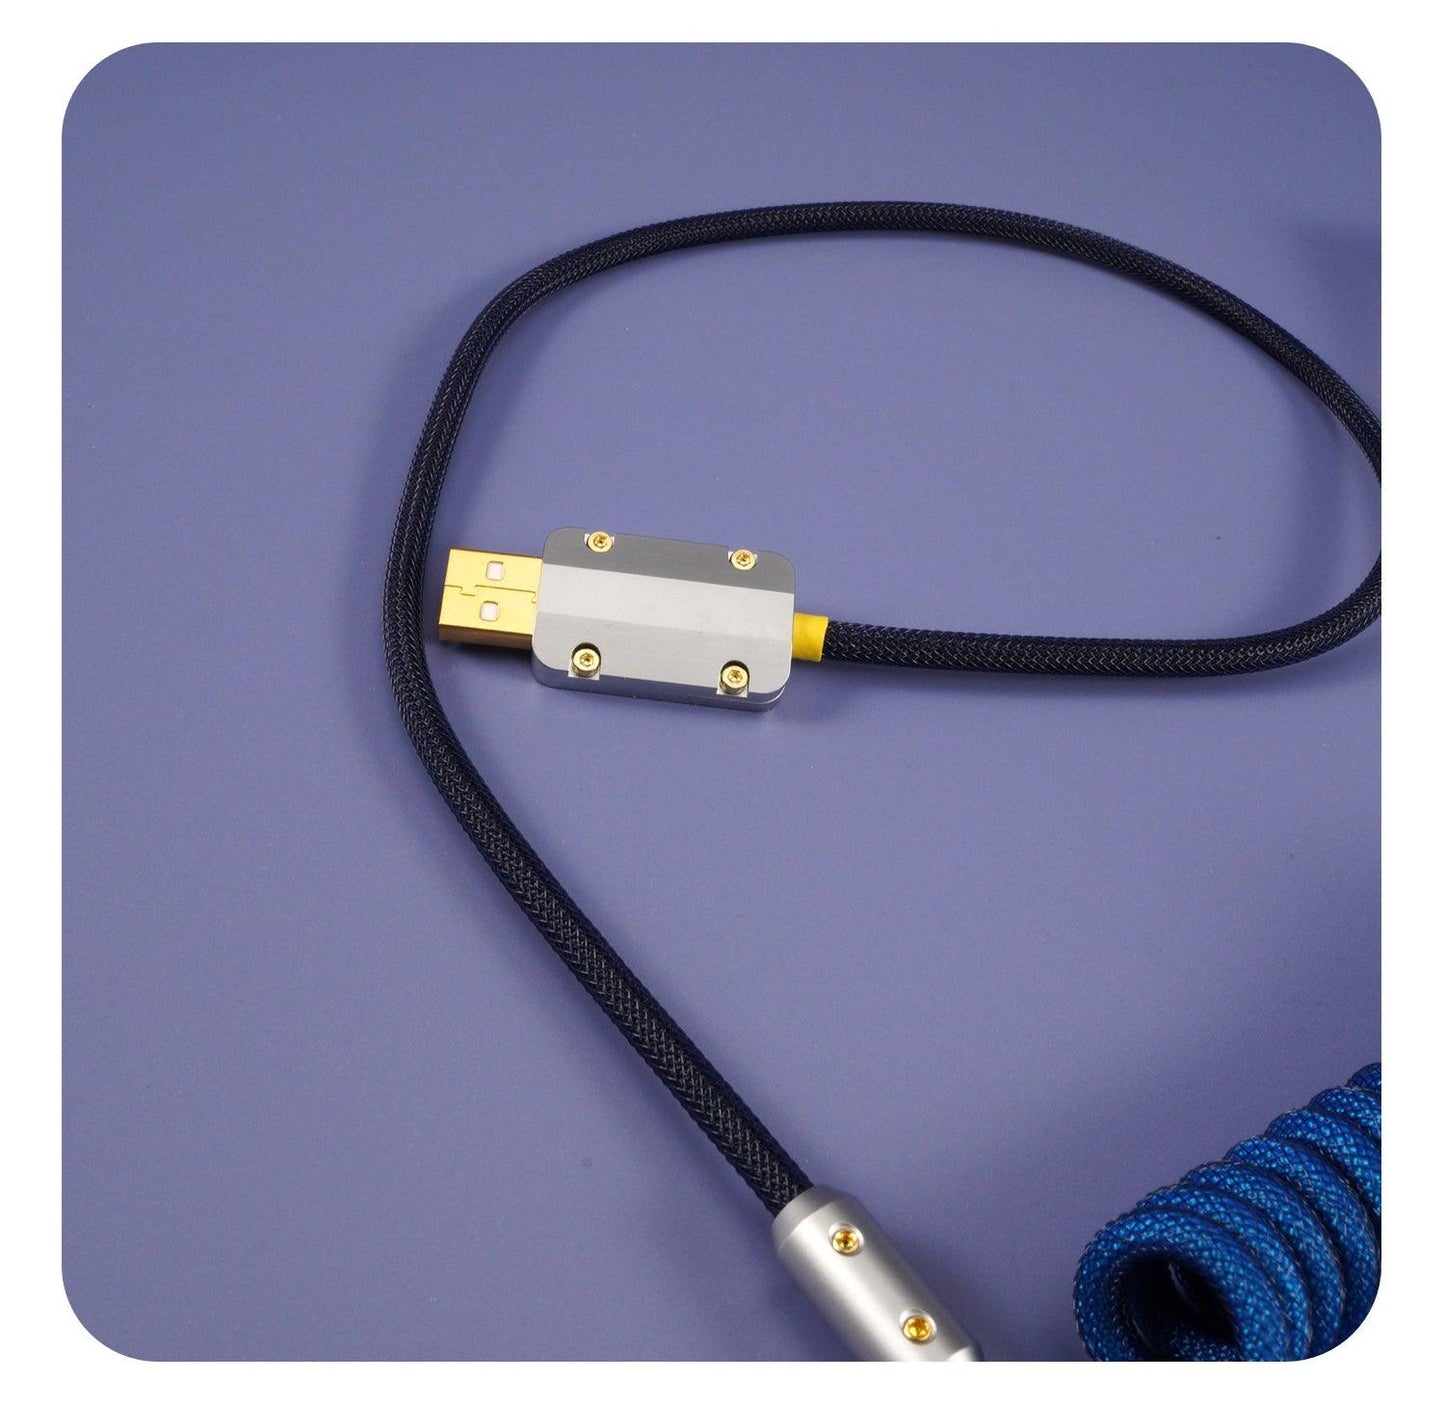 GeekCable Dark Blue Manual Customized Mechanical Keyboard Cable - IPOPULARSHOP